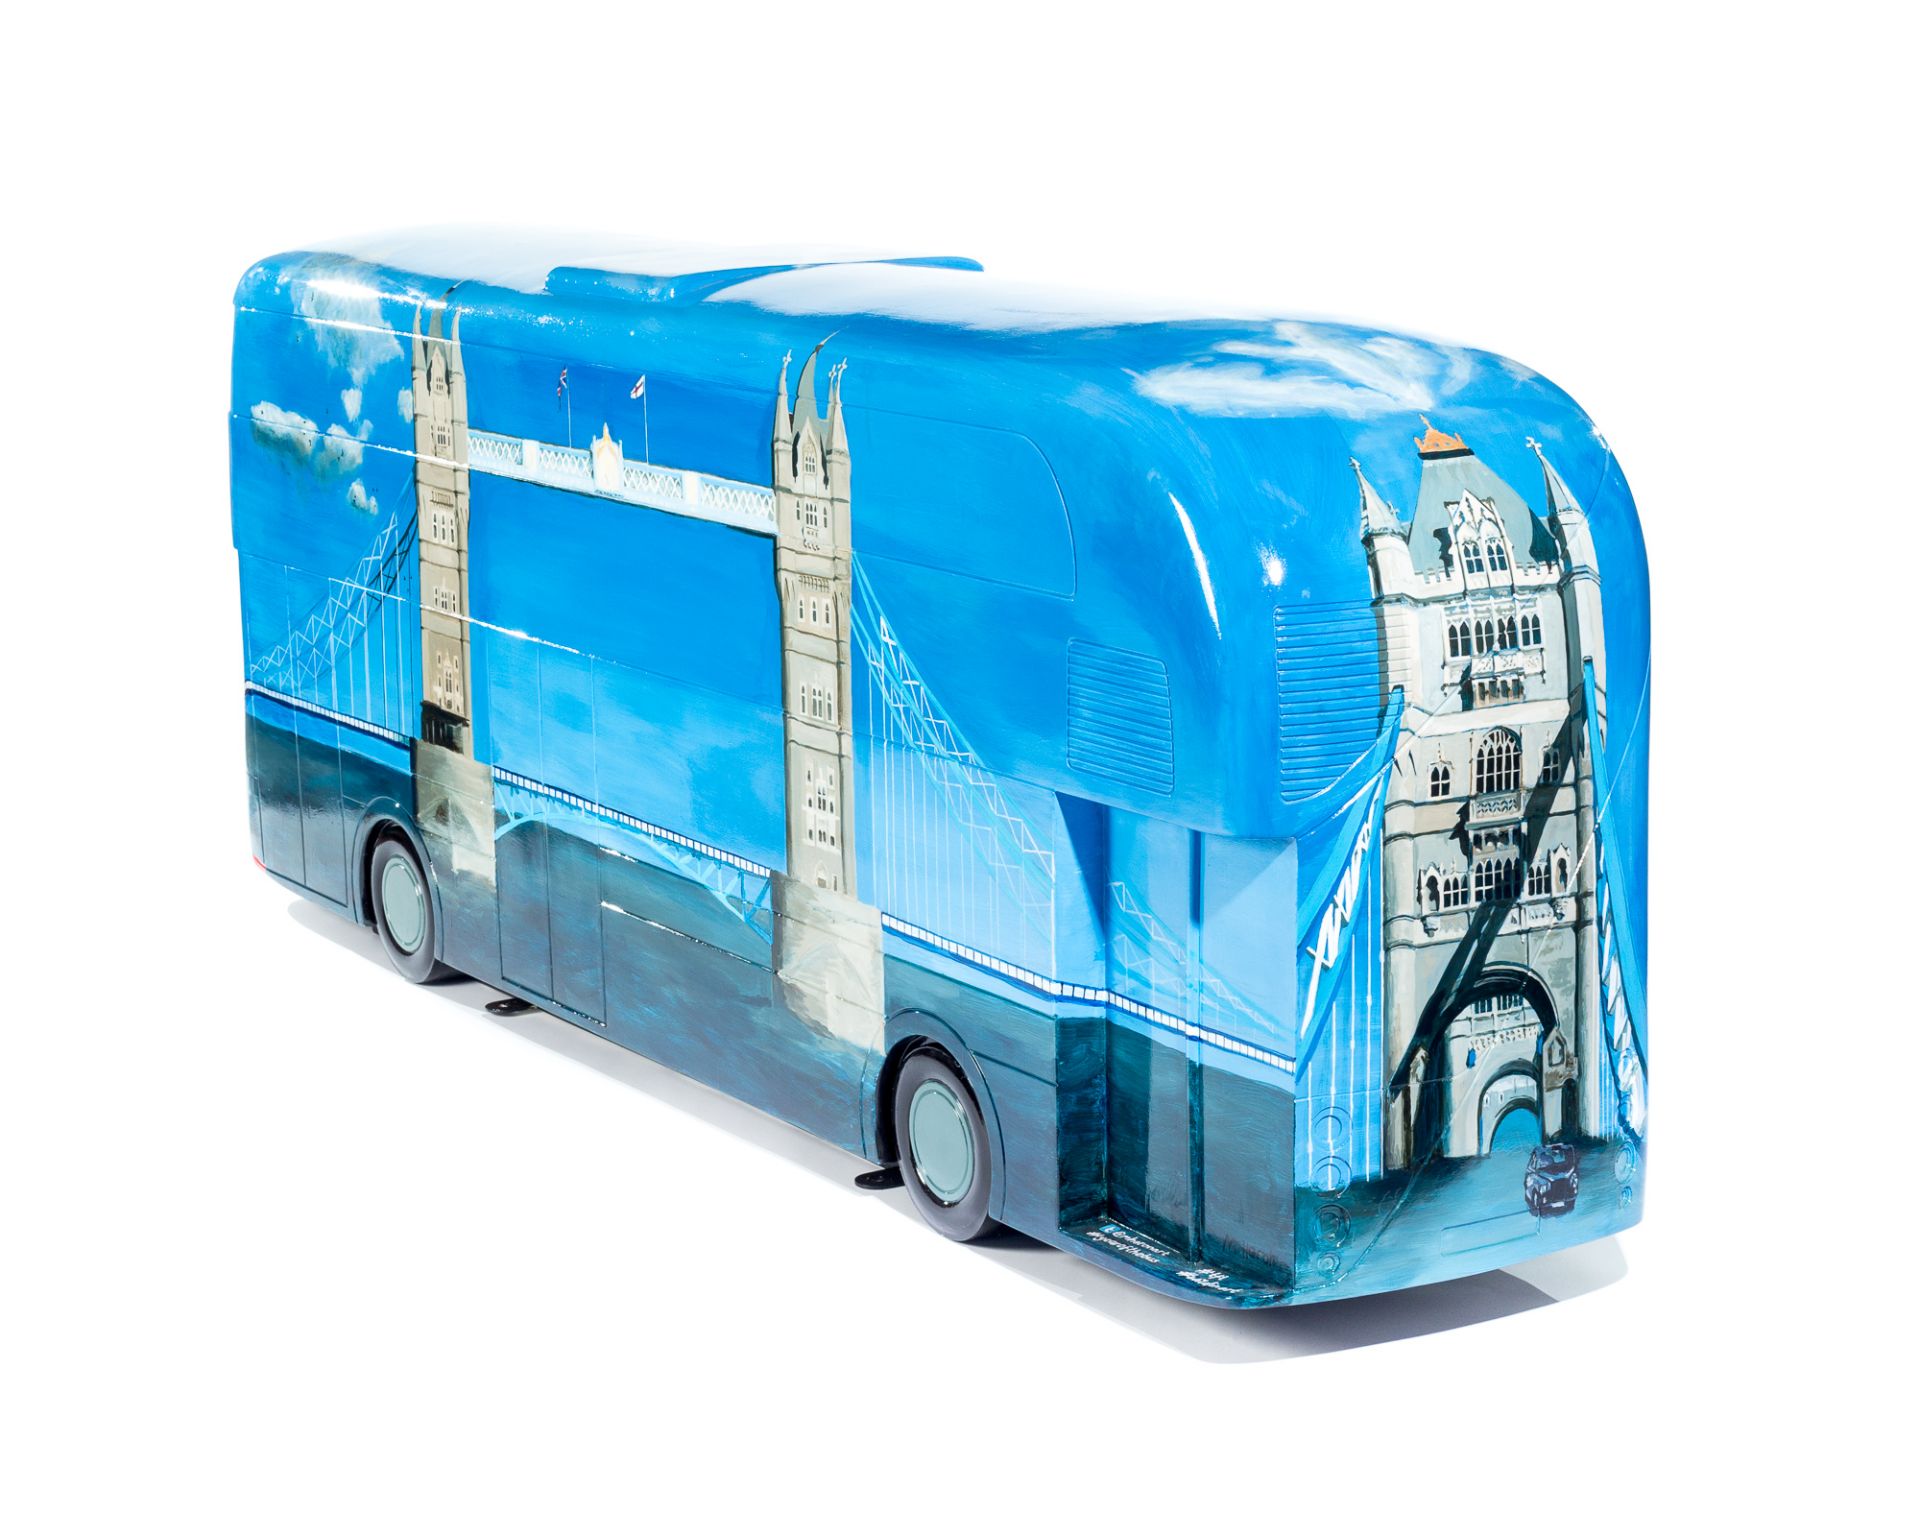 Artist: Michelle Heron  Design: Tower Bridge Bus    About the artist   Michelle was born and - Image 2 of 3